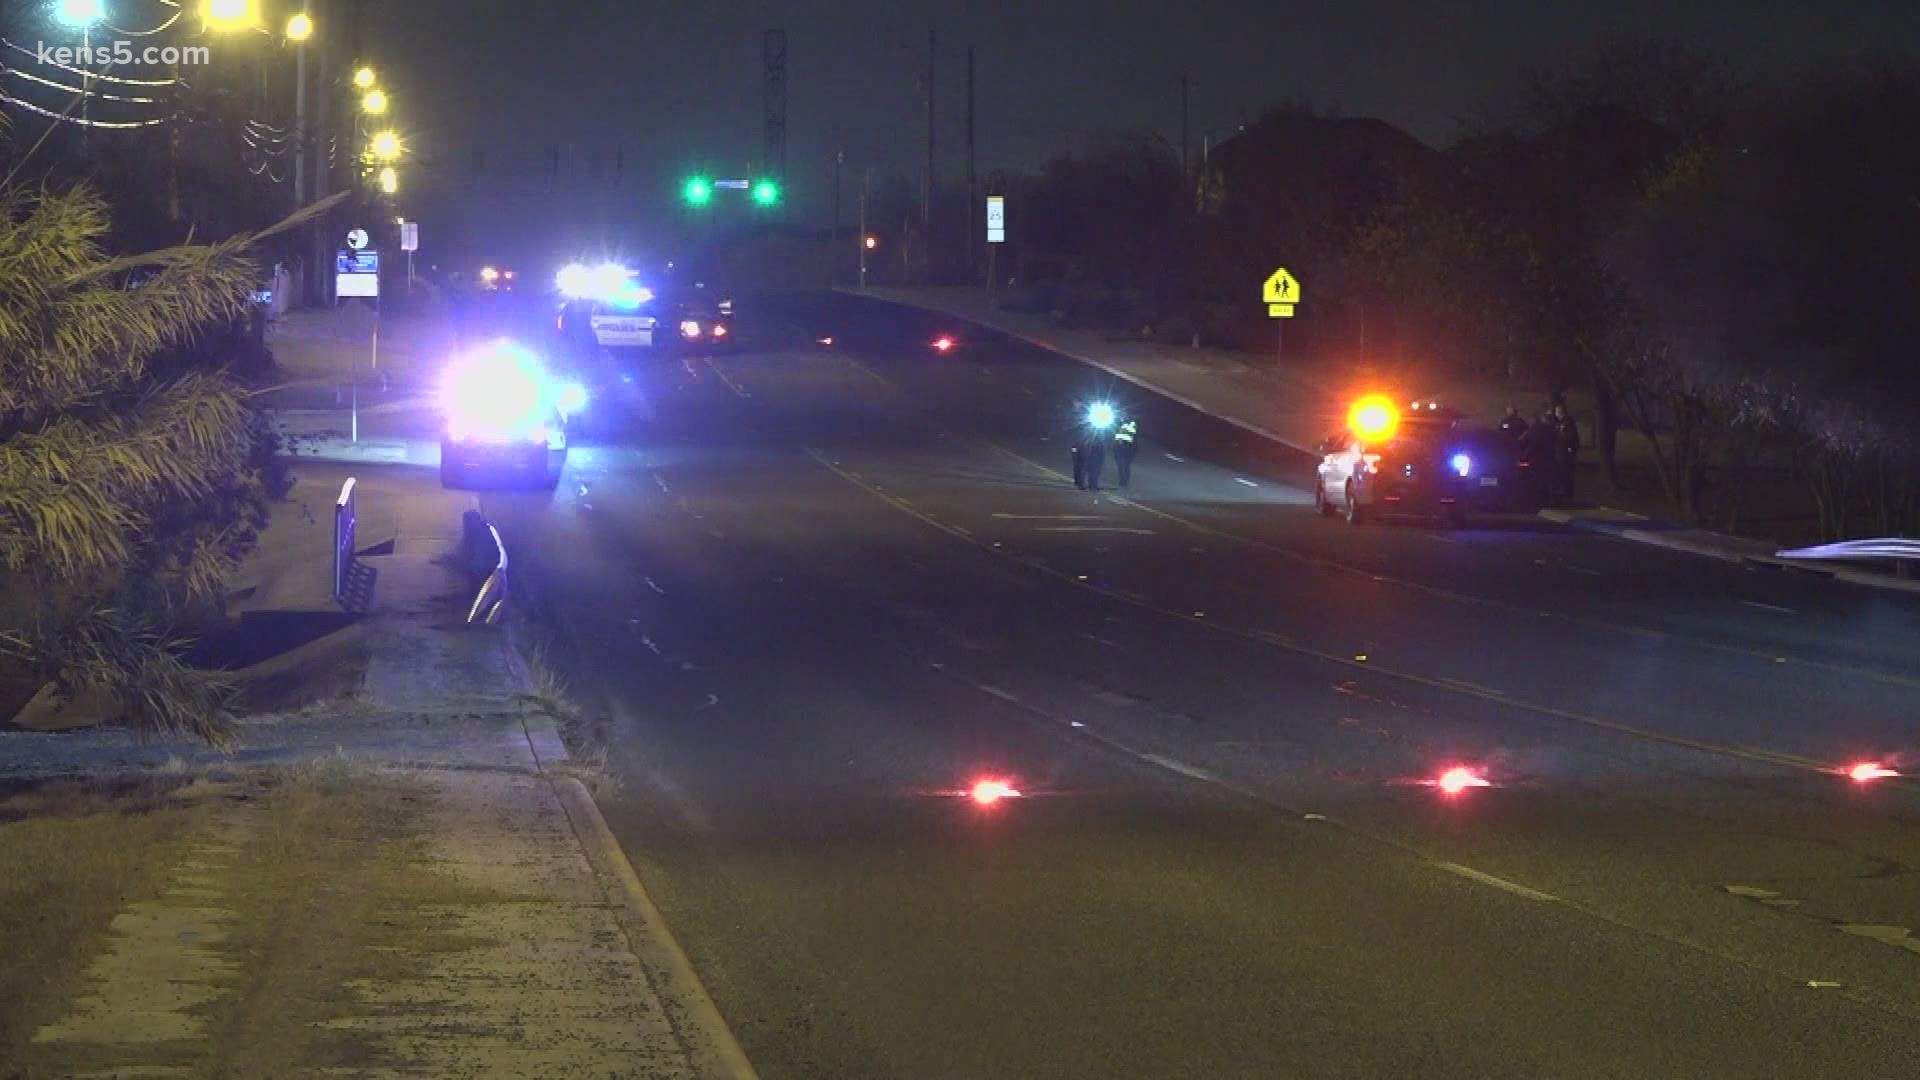 A man was found shot to death inside a vehicle on the northeast side, San Antonio Police said.